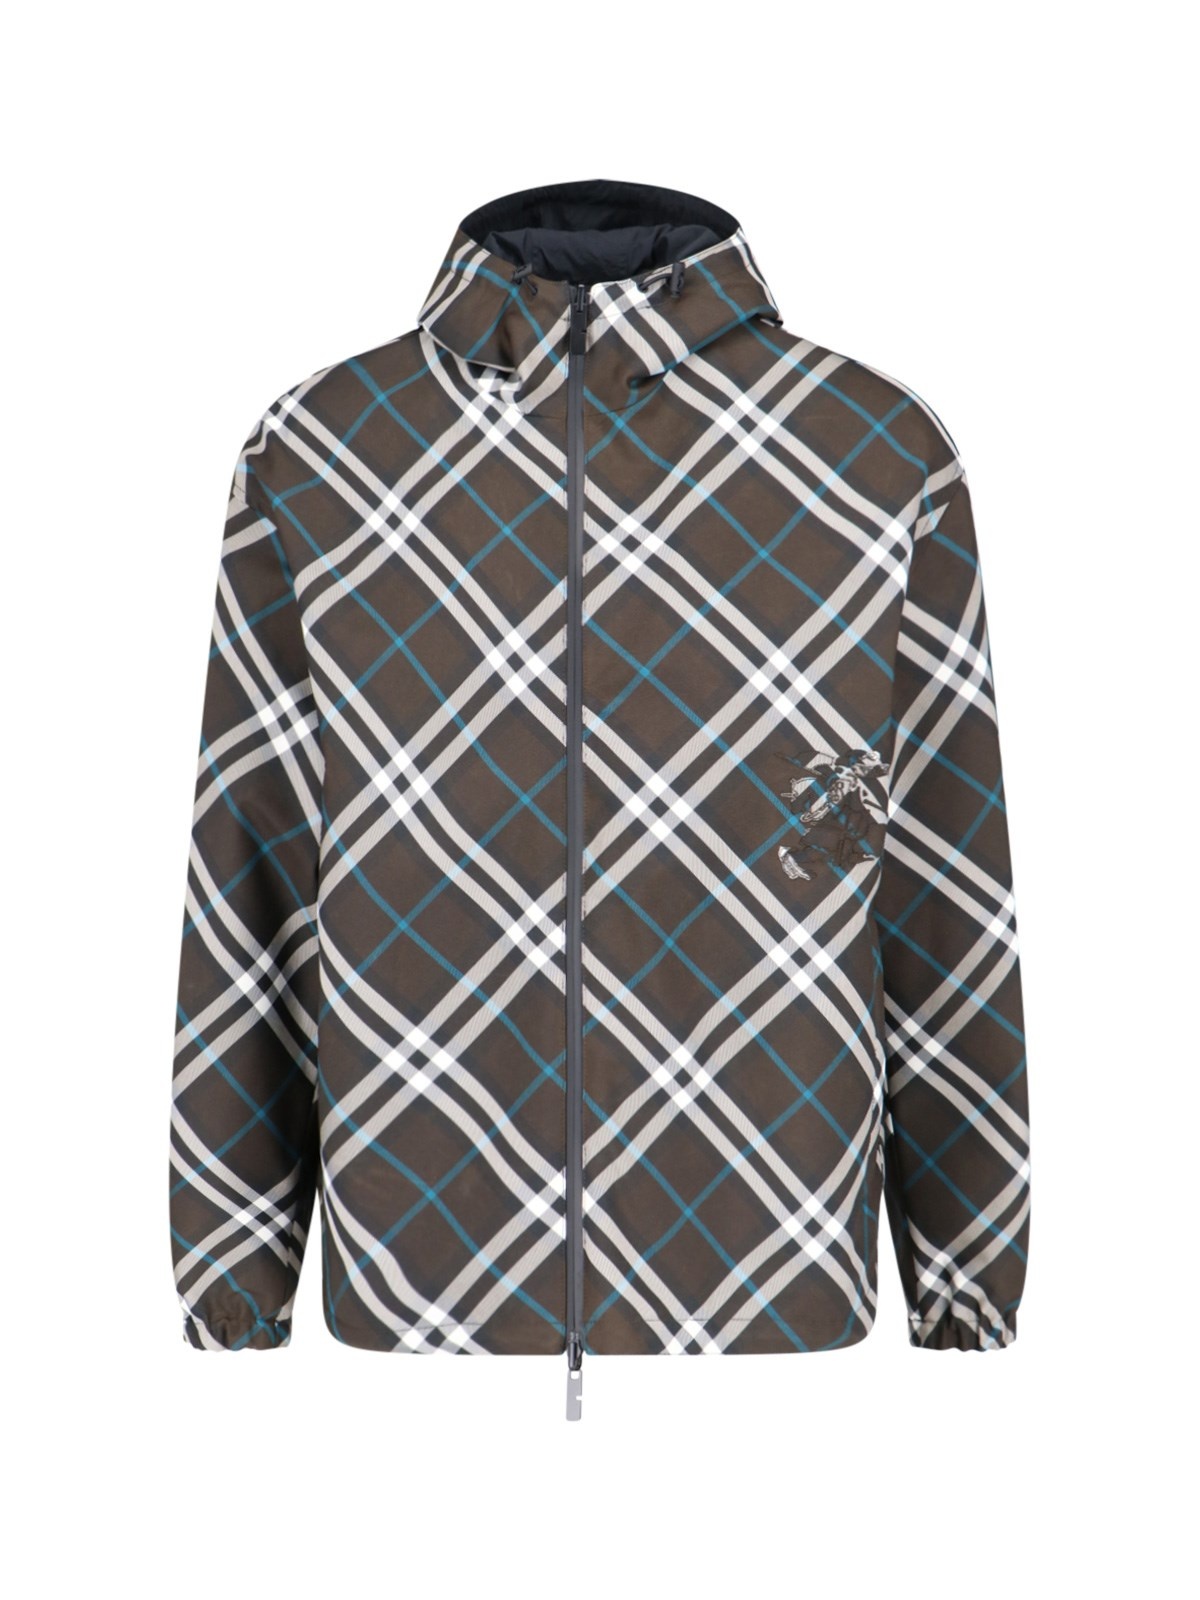 "CHECK" REVERSIBLE TECHNICAL JACKET - 1